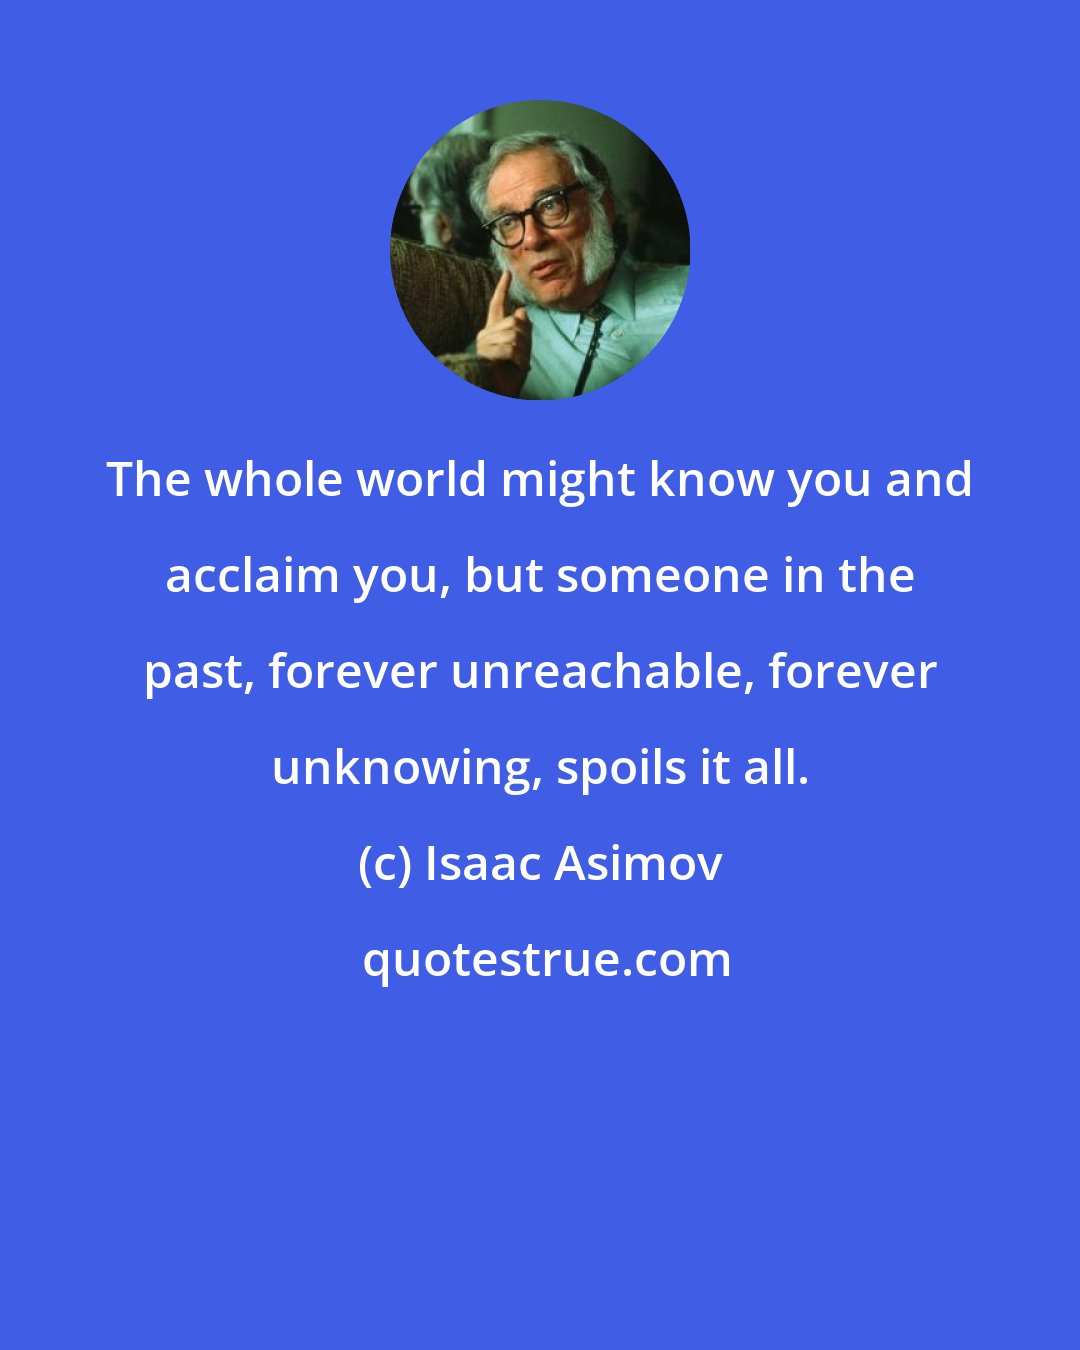 Isaac Asimov: The whole world might know you and acclaim you, but someone in the past, forever unreachable, forever unknowing, spoils it all.